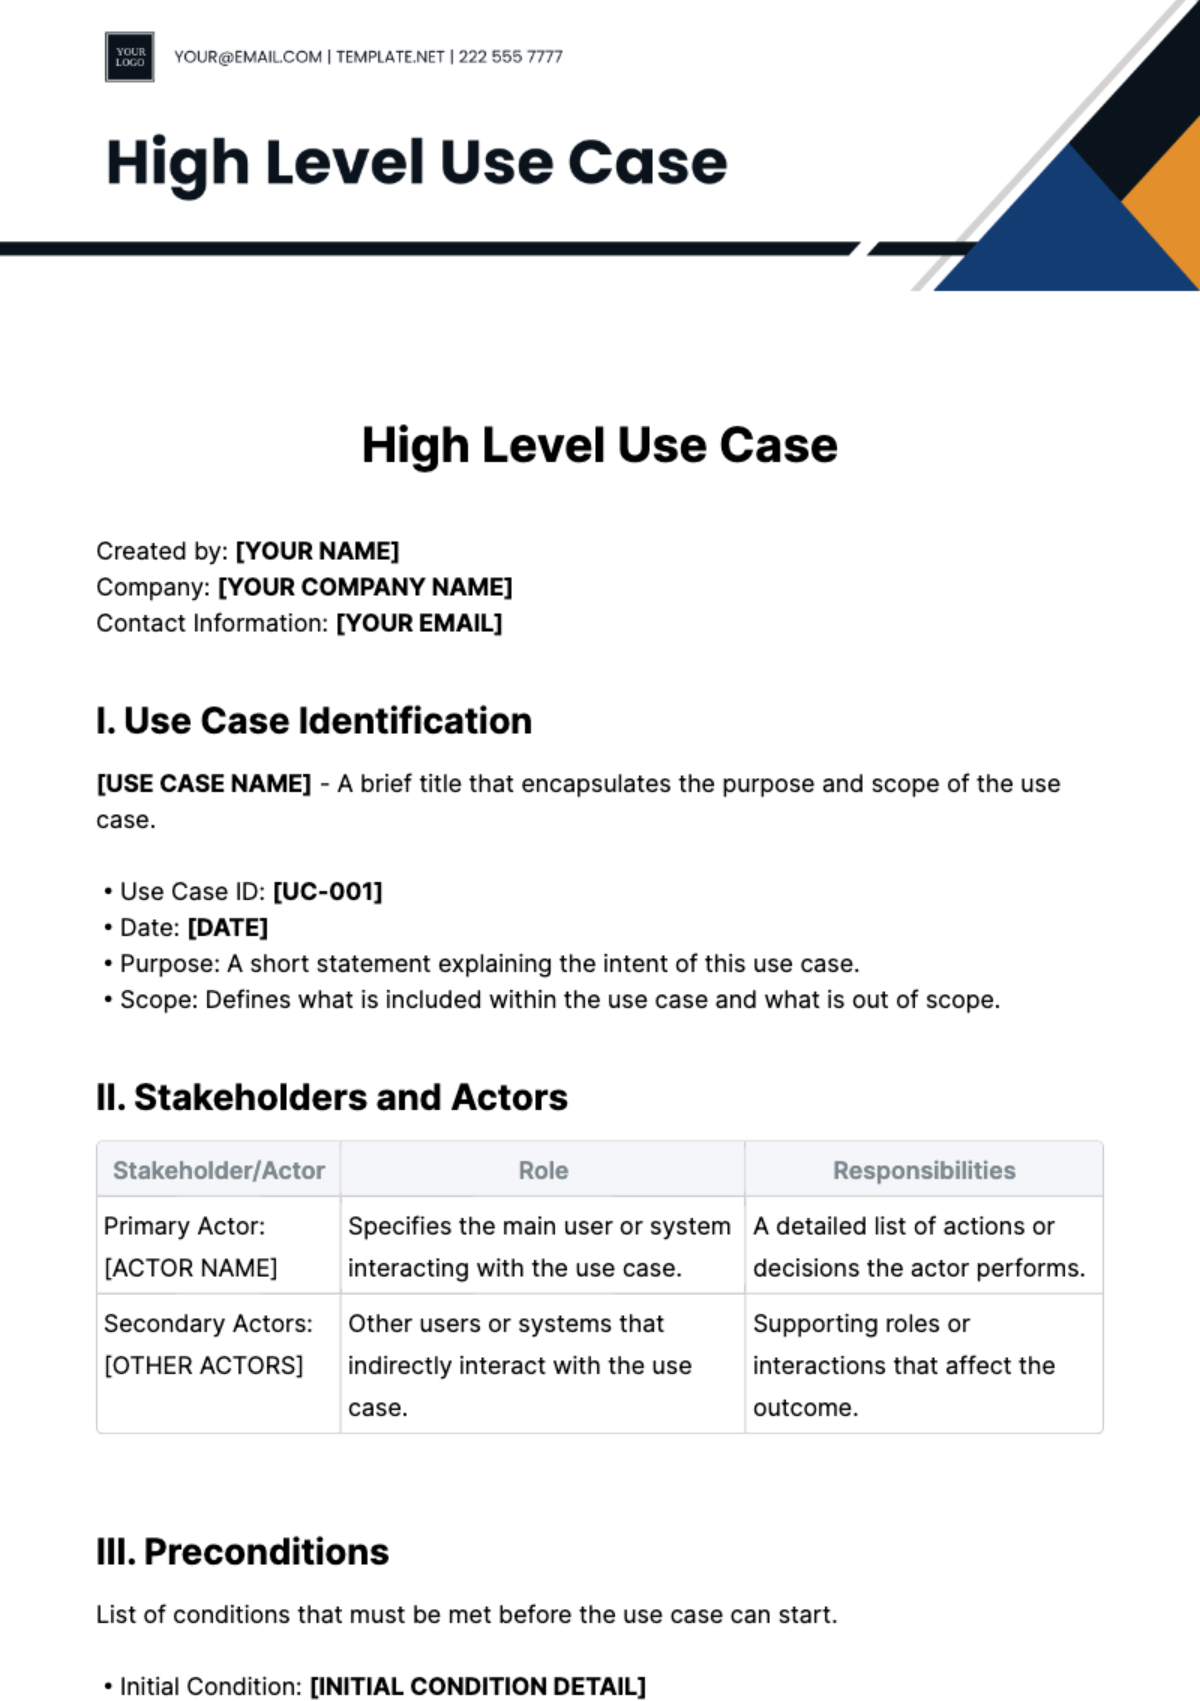 High Level Use Case Template